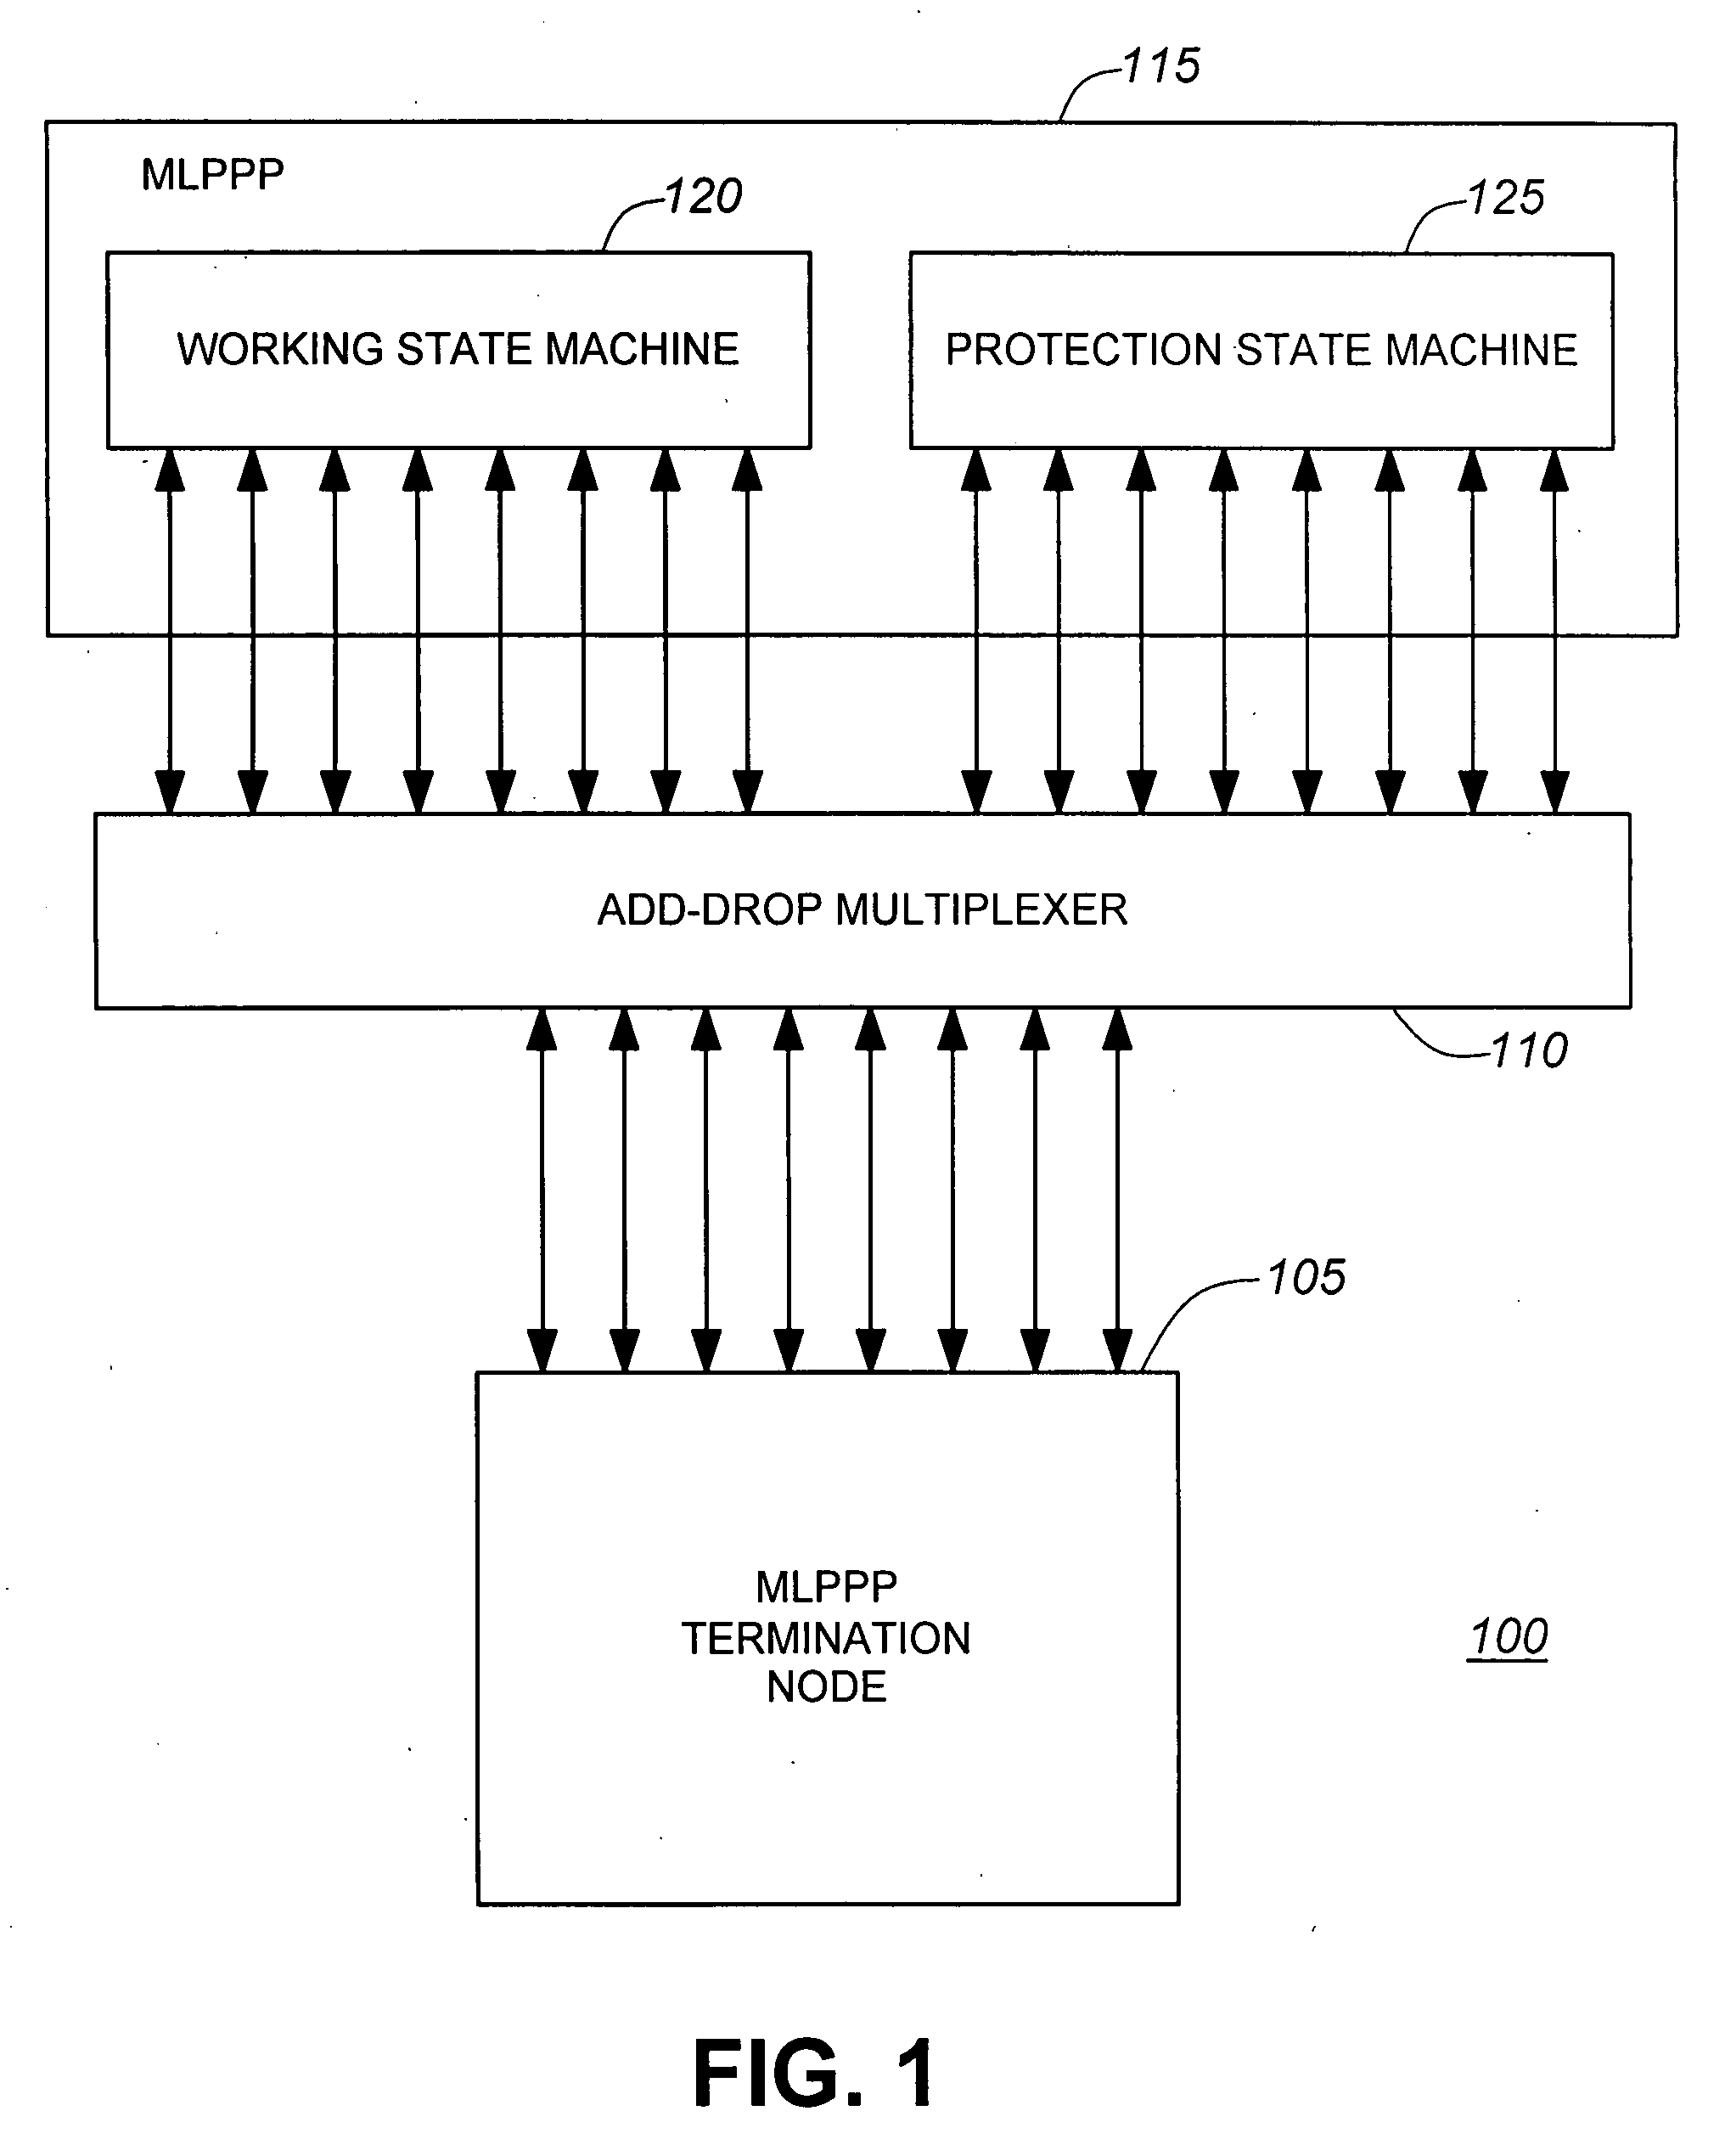 Mechanism and method for non-service affecting APS protection for MLPPP bundles on routing systems